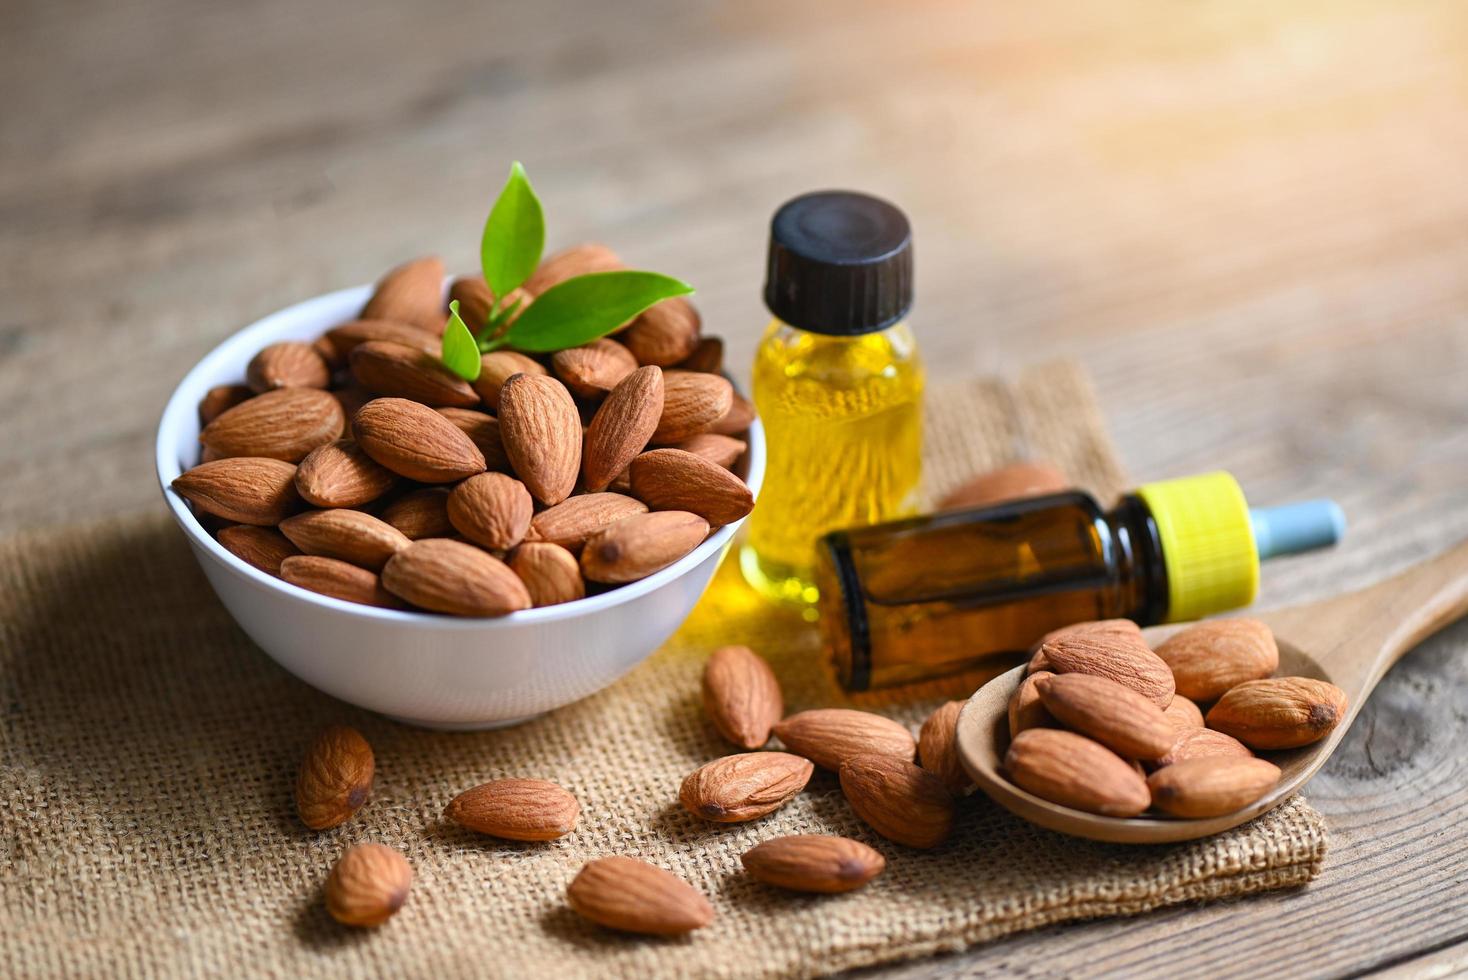 Almond oil and Almonds nuts on bowl, Delicious sweet almonds oil in glass bottle, roasted almond nut for healthy food and snack organic vegetable oils for cooking or spa concept photo